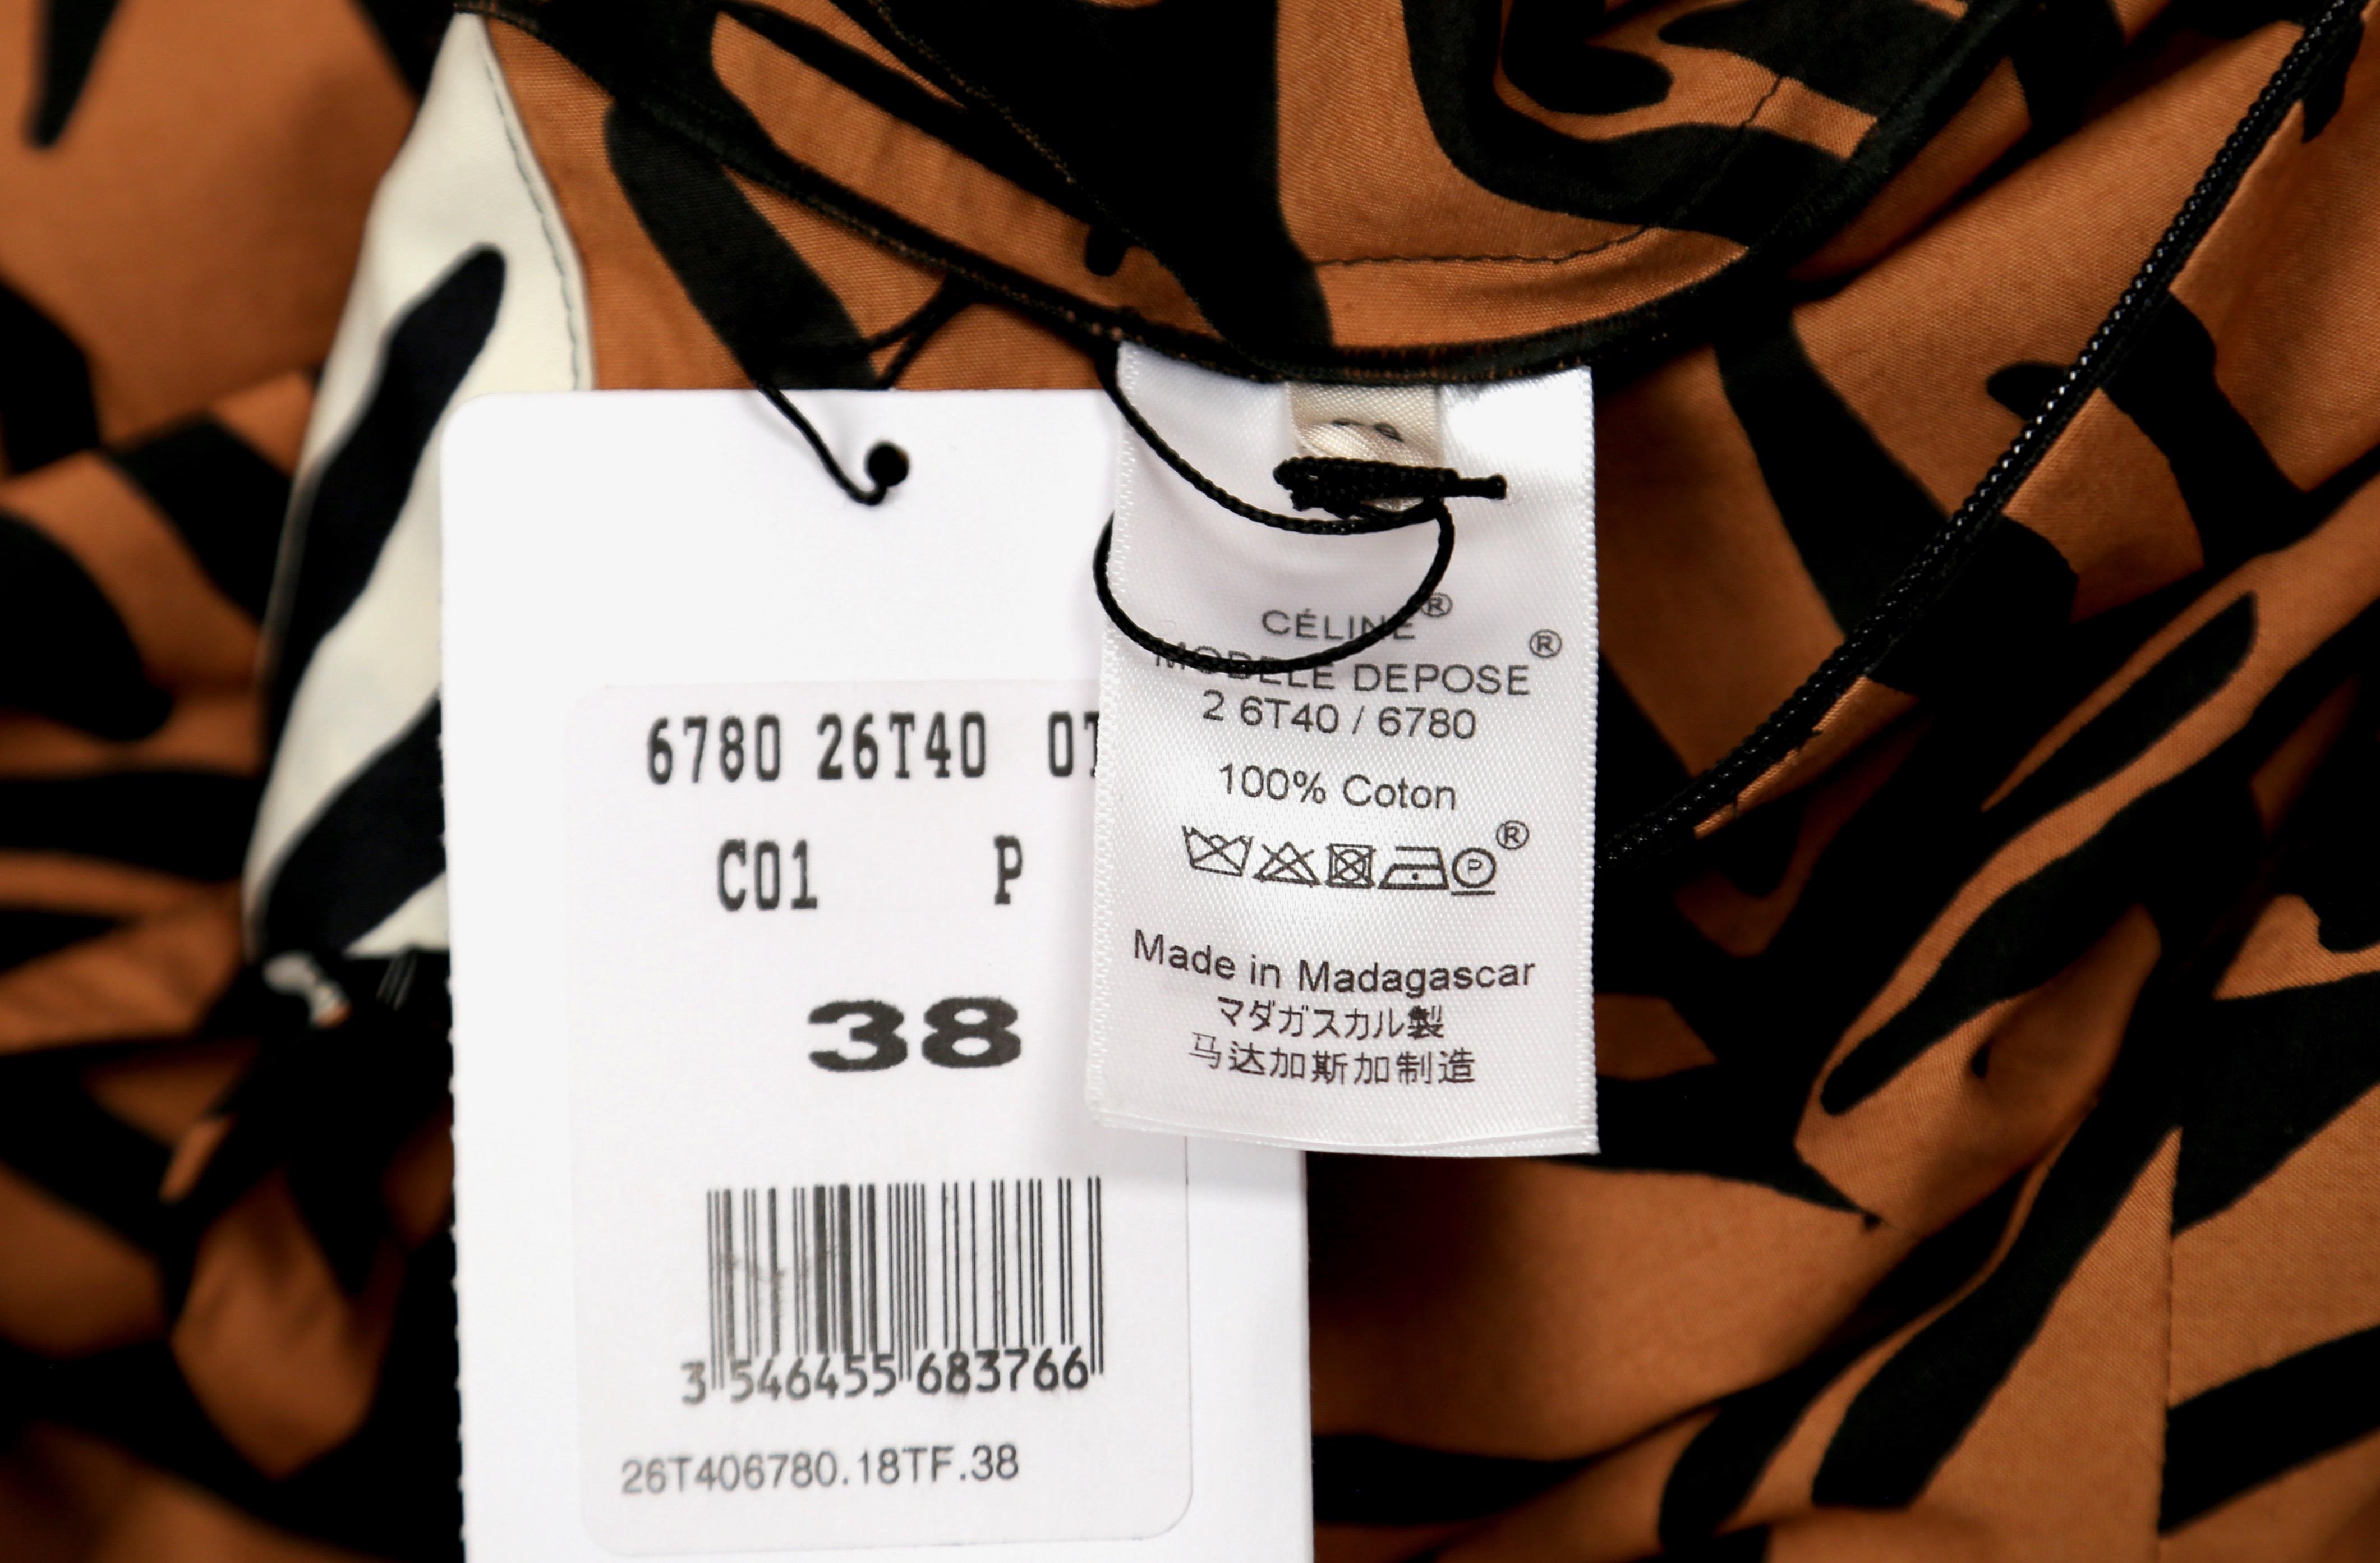 CELINE by PHOEBE PHILO tiger print draped dress with open back - new 1